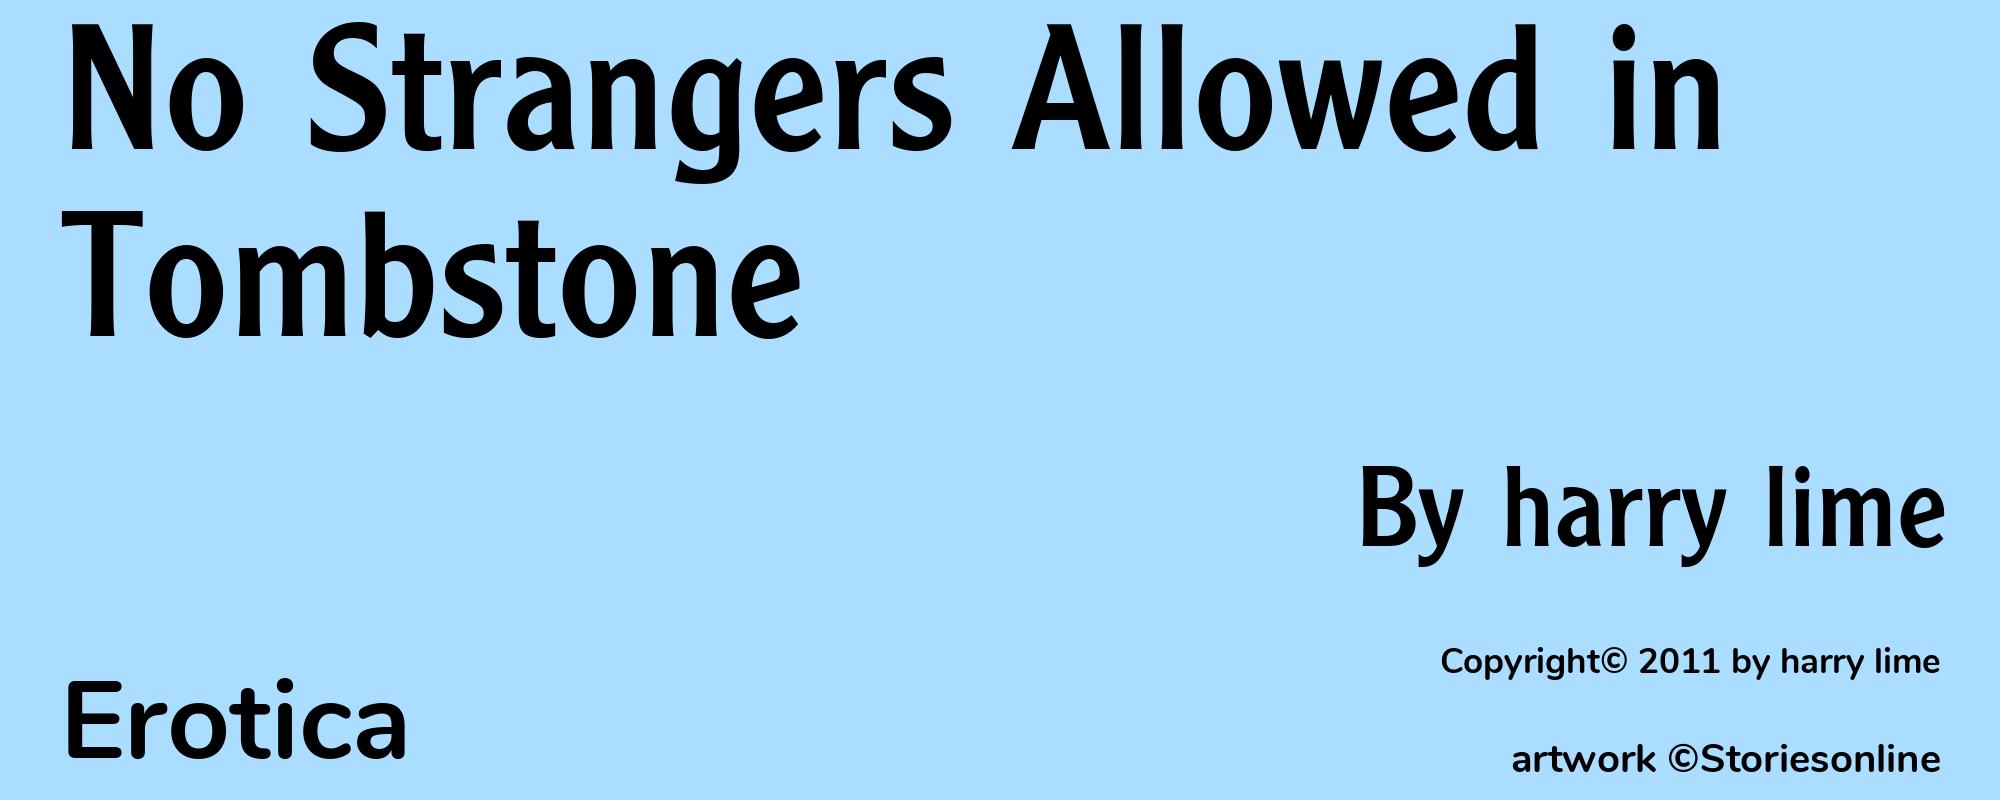 No Strangers Allowed in Tombstone - Cover